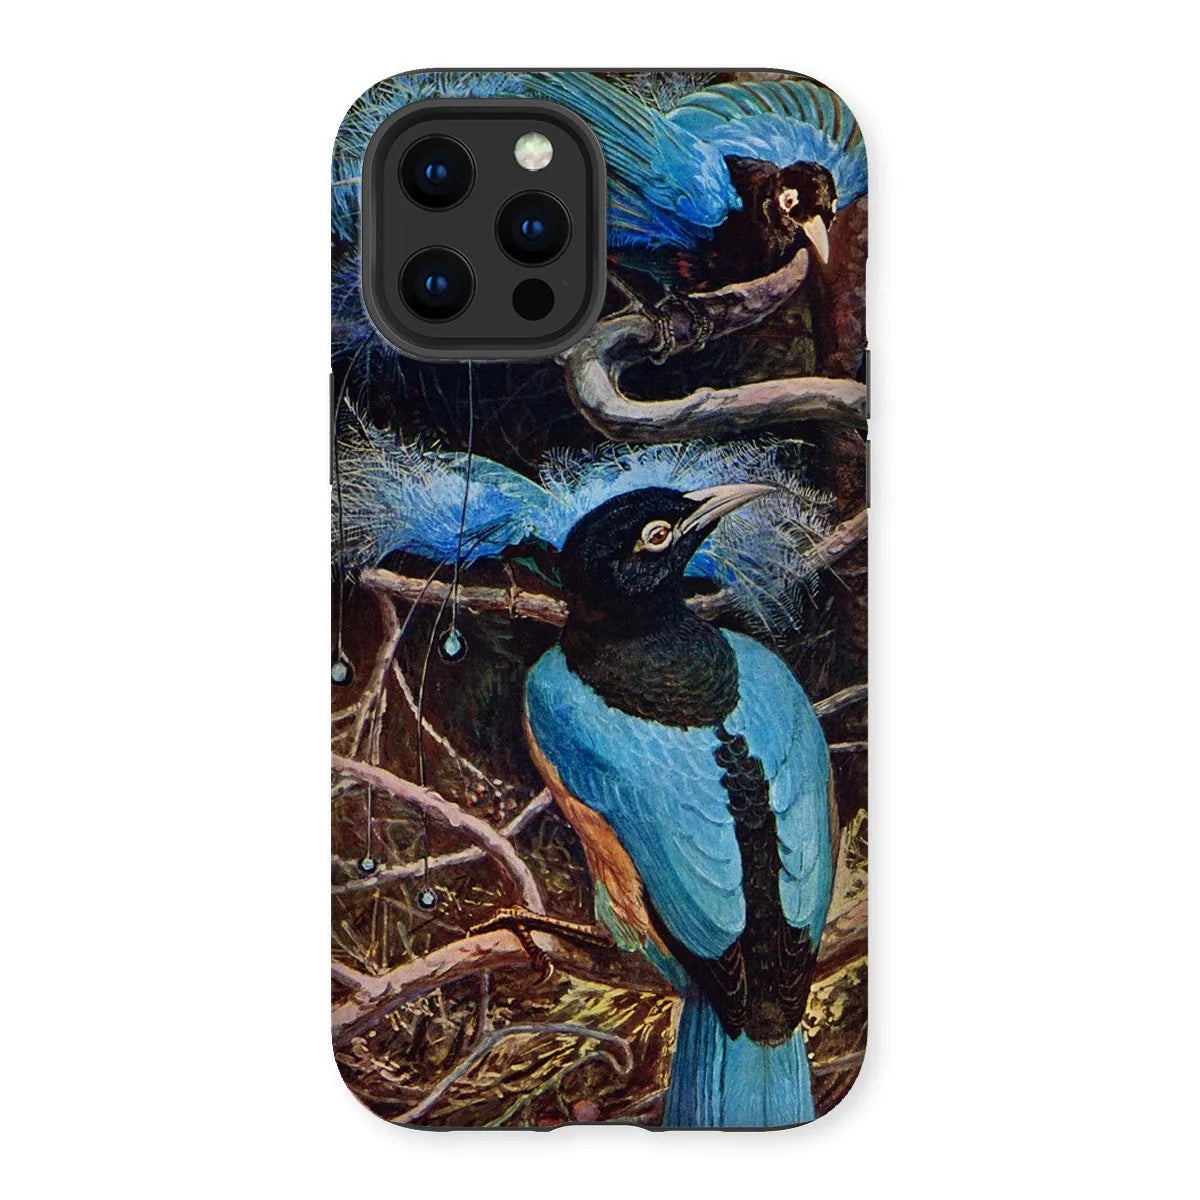 Blue Bird Of Paradise Aesthetic Phone Case - Henry Johnston - Iphone 12 Pro Max / Matte - Mobile Phone Cases